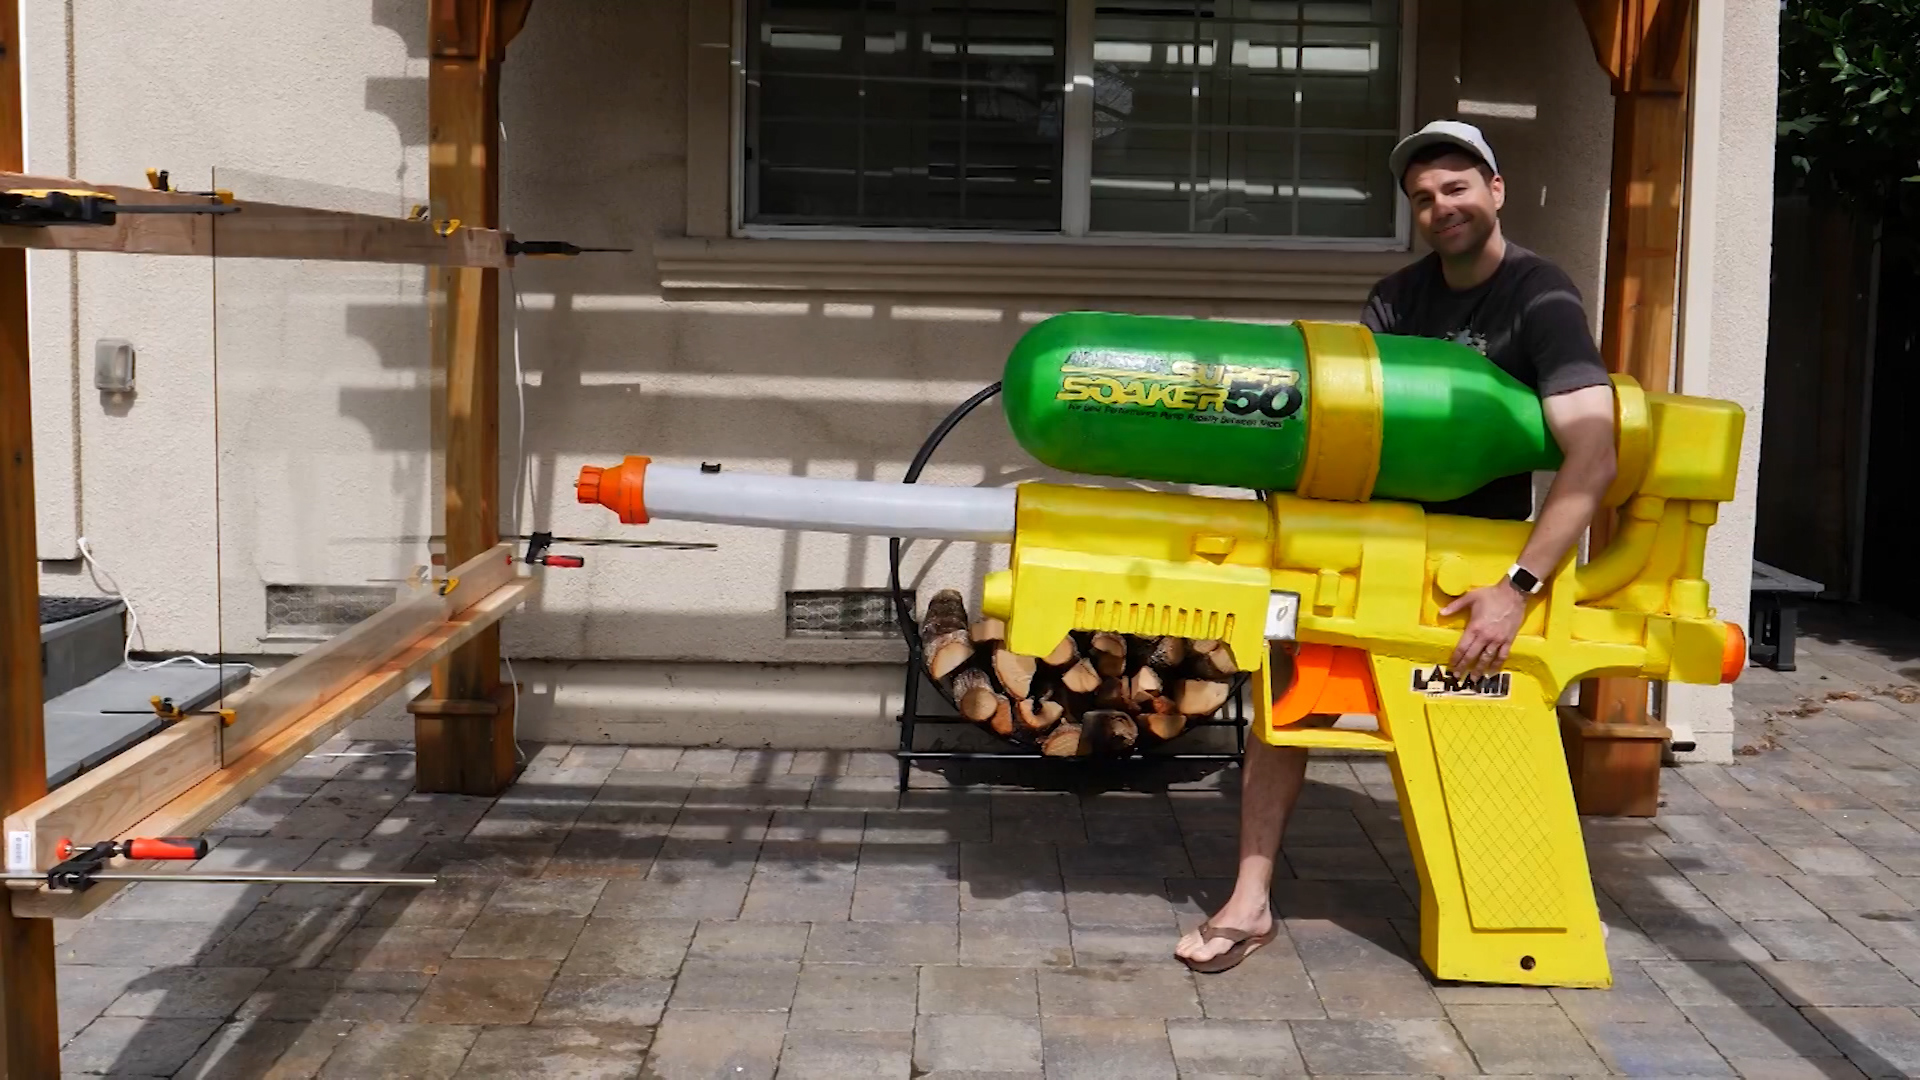 A Former Nasa Engineer Has Created What May Be The World S Largest Water Gun Cnn